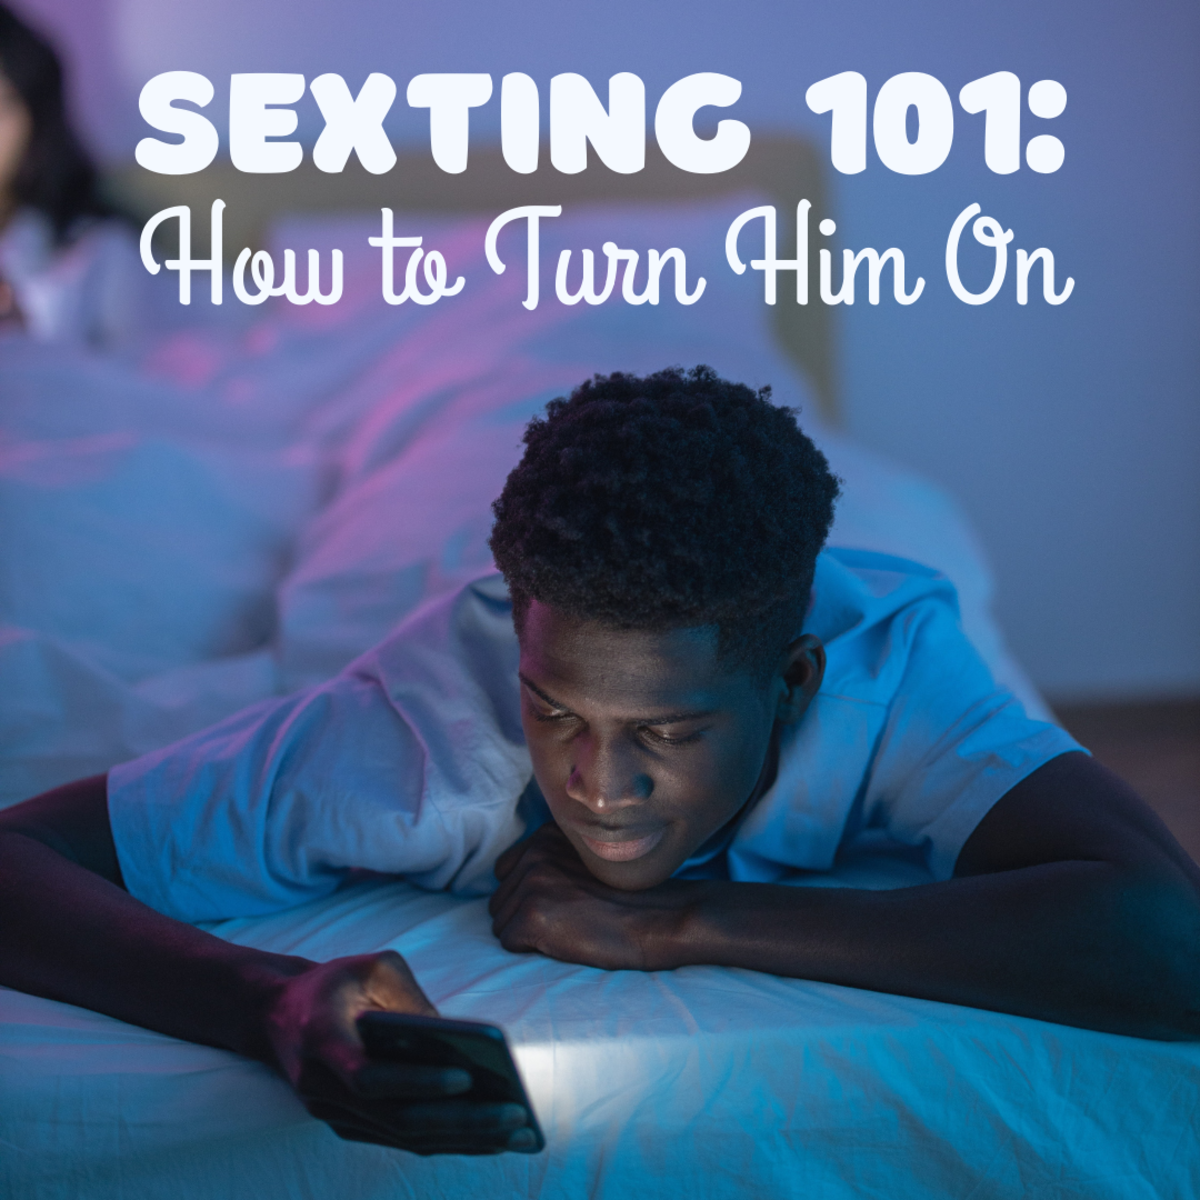 100+ Examples of Sexting to Turn a Guy On by Text - PairedLife